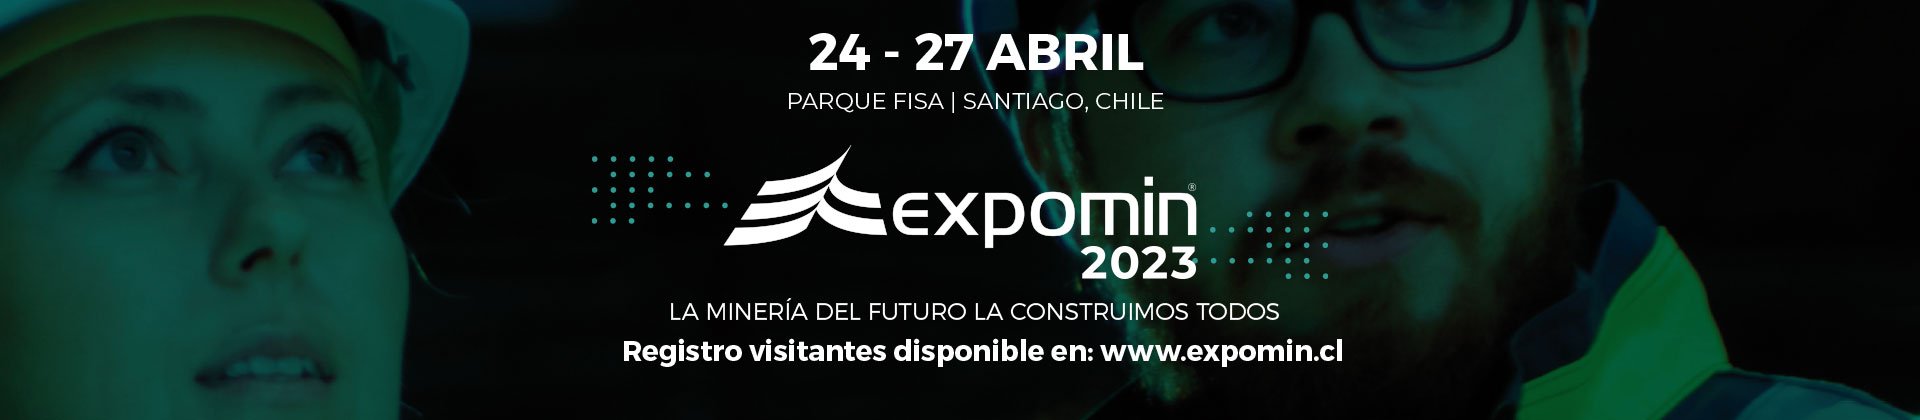 EXPOMIN 2023